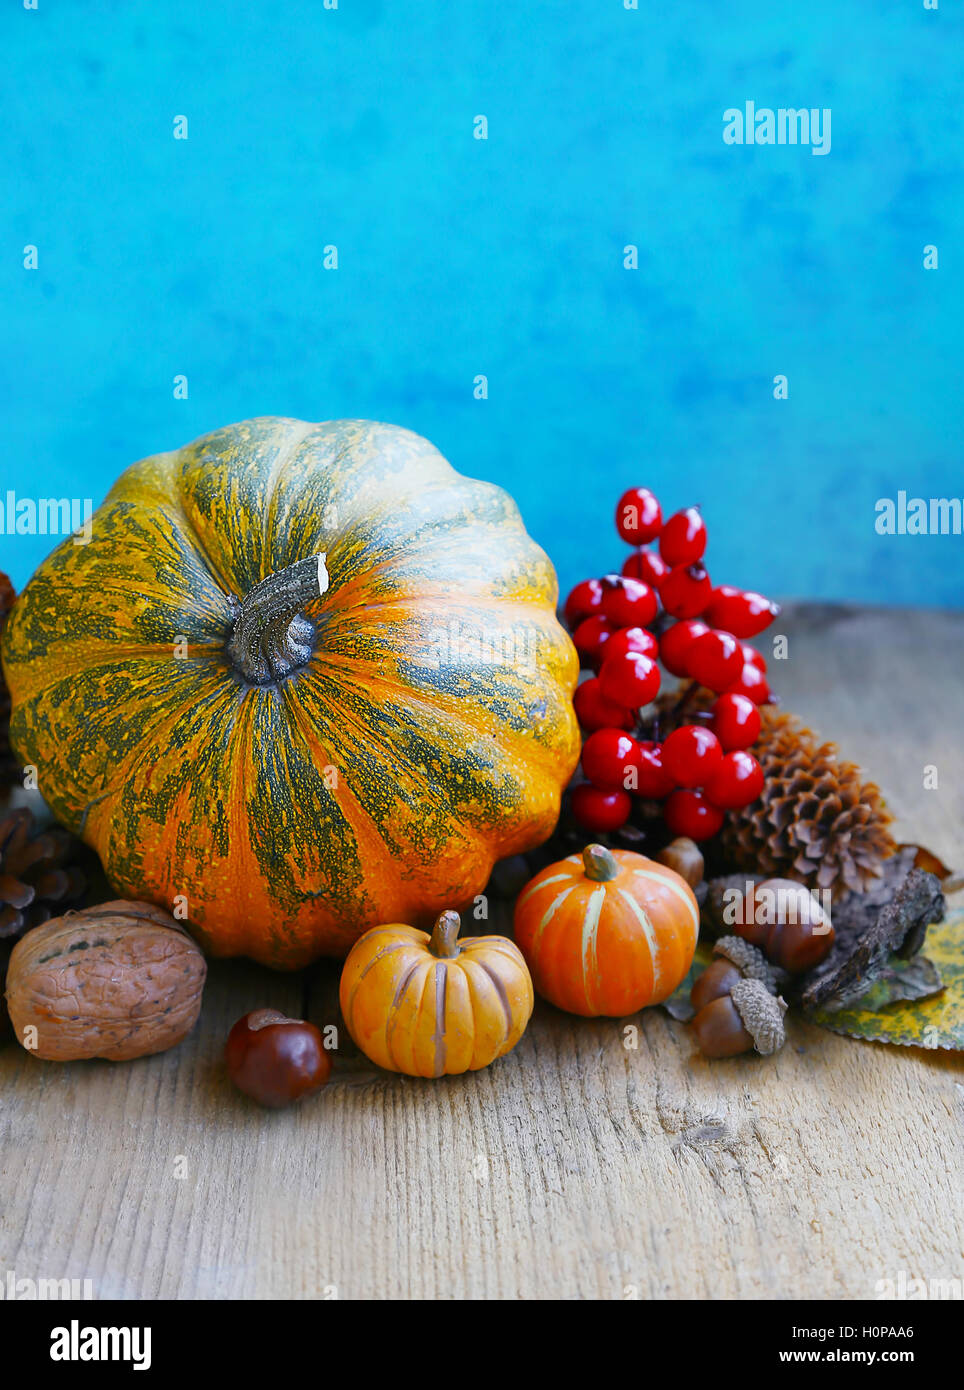 Autumn decorative pumpkins, cones and nuts on vintage background Stock Photo